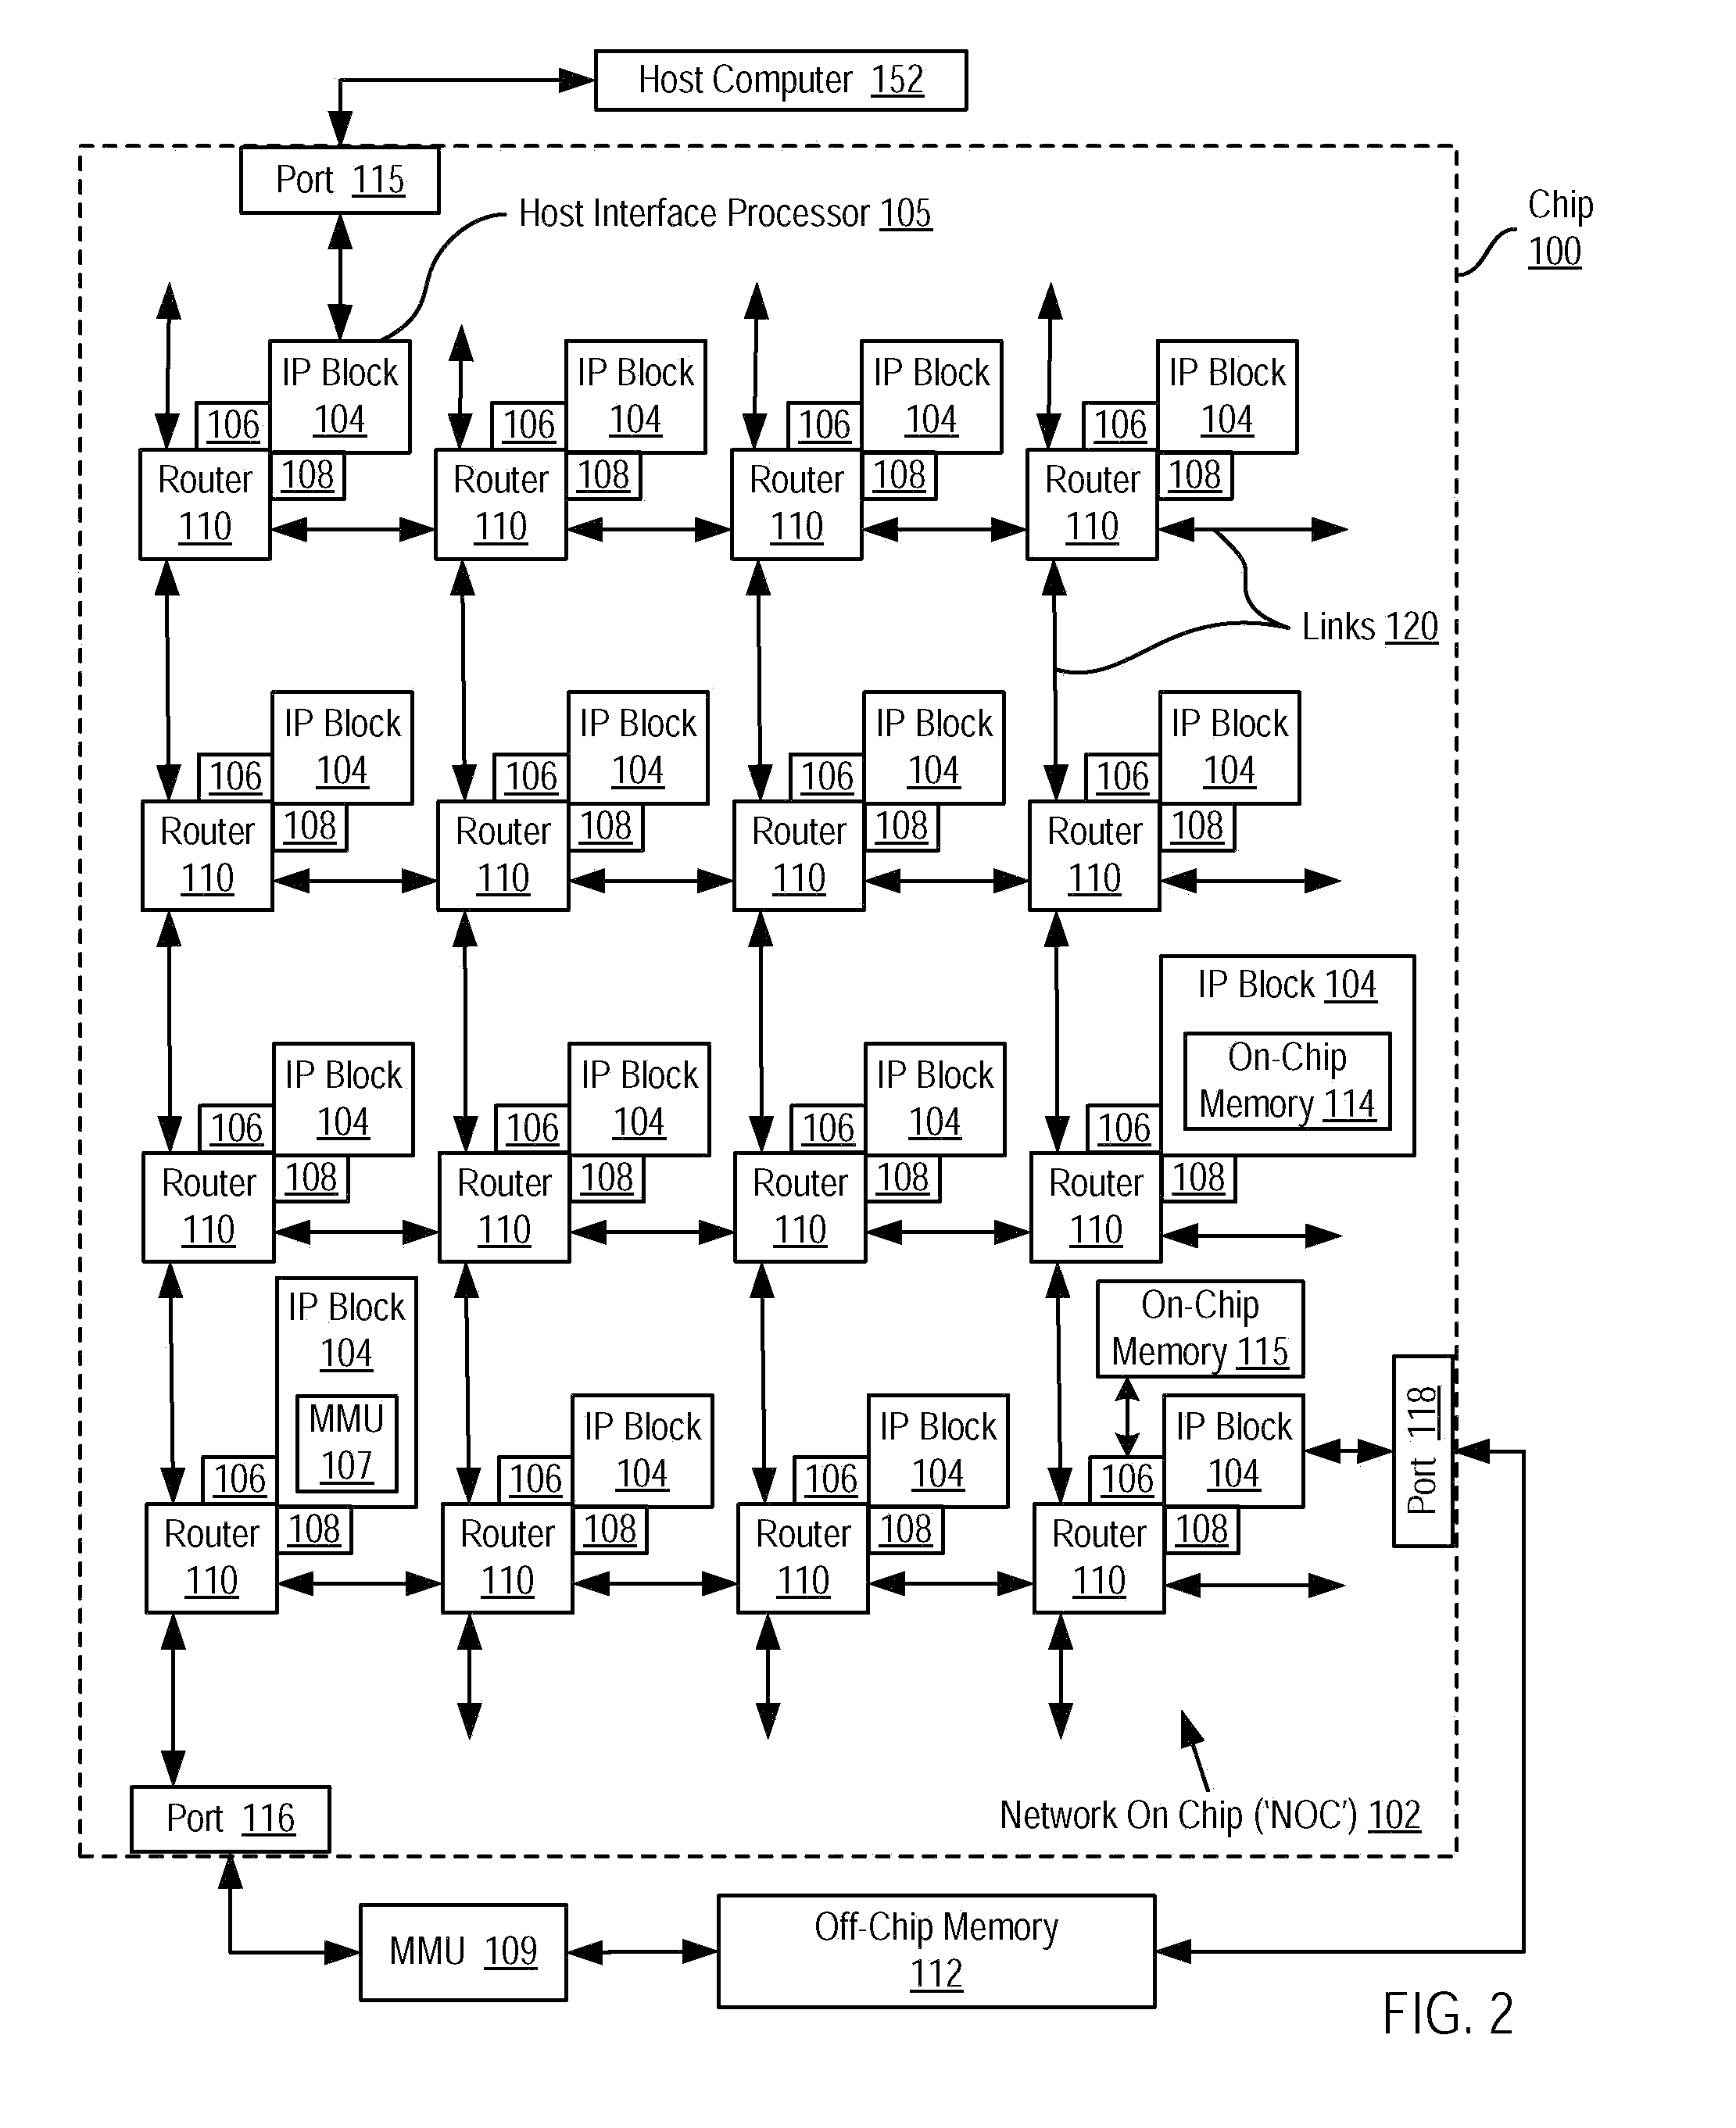 Network On Chip that Maintains Cache Coherency with Invalidate Commands